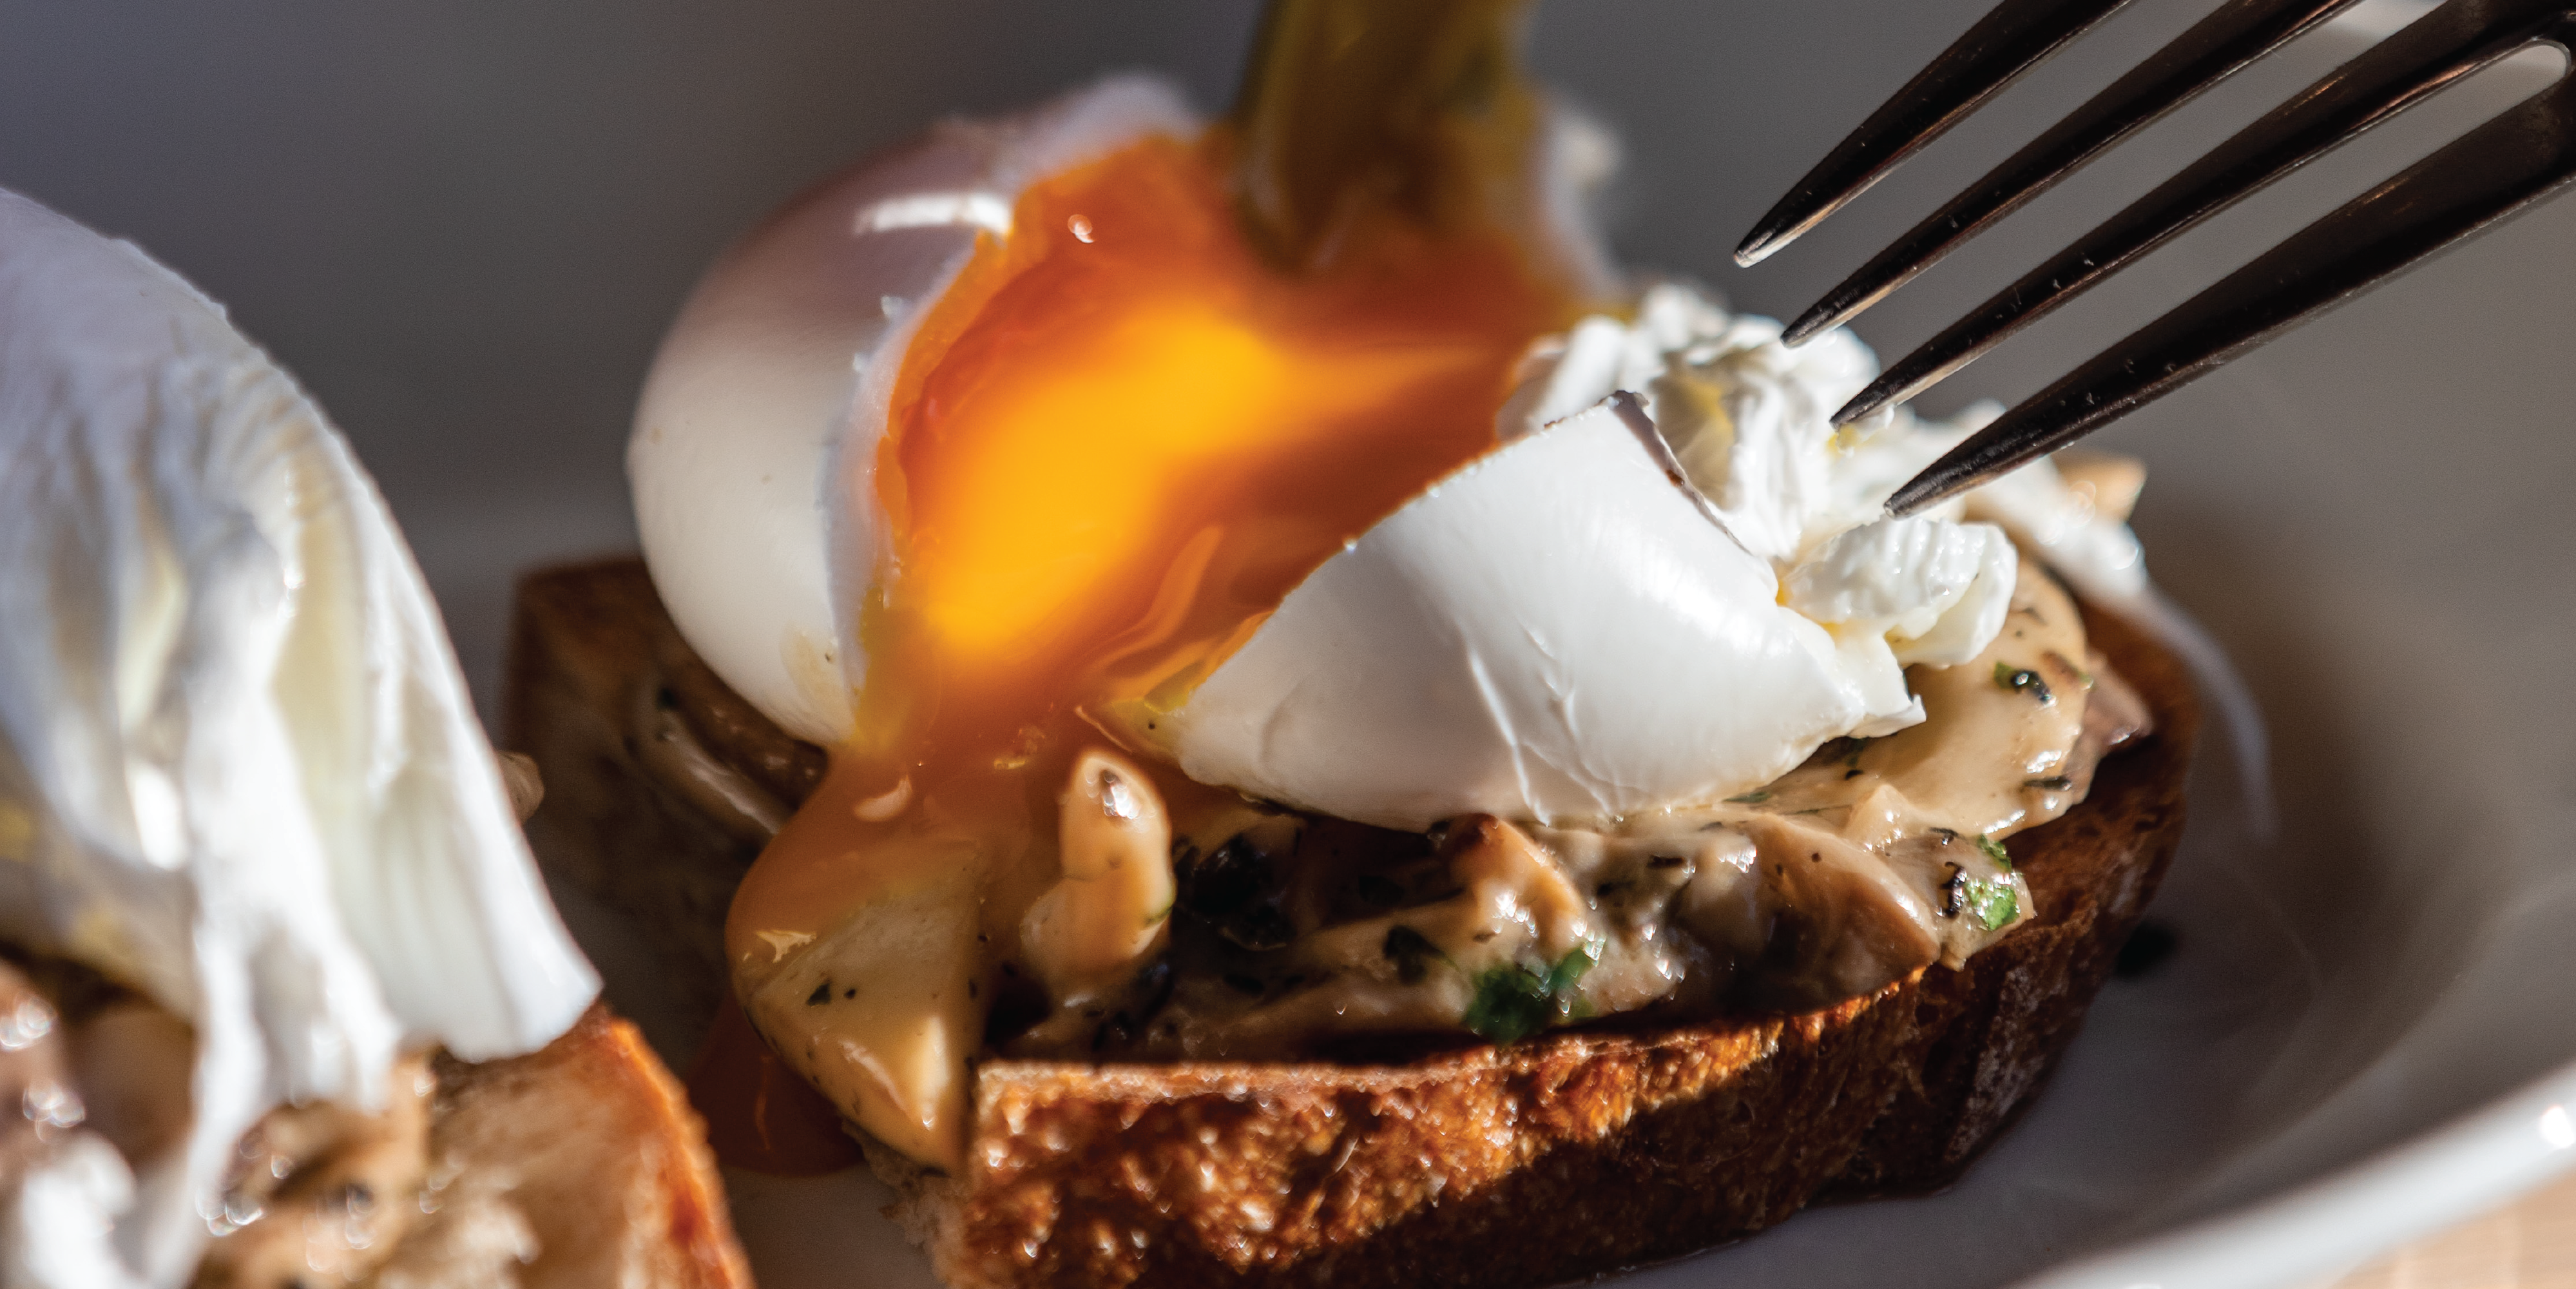 Mushroom Tartine with a poached egg